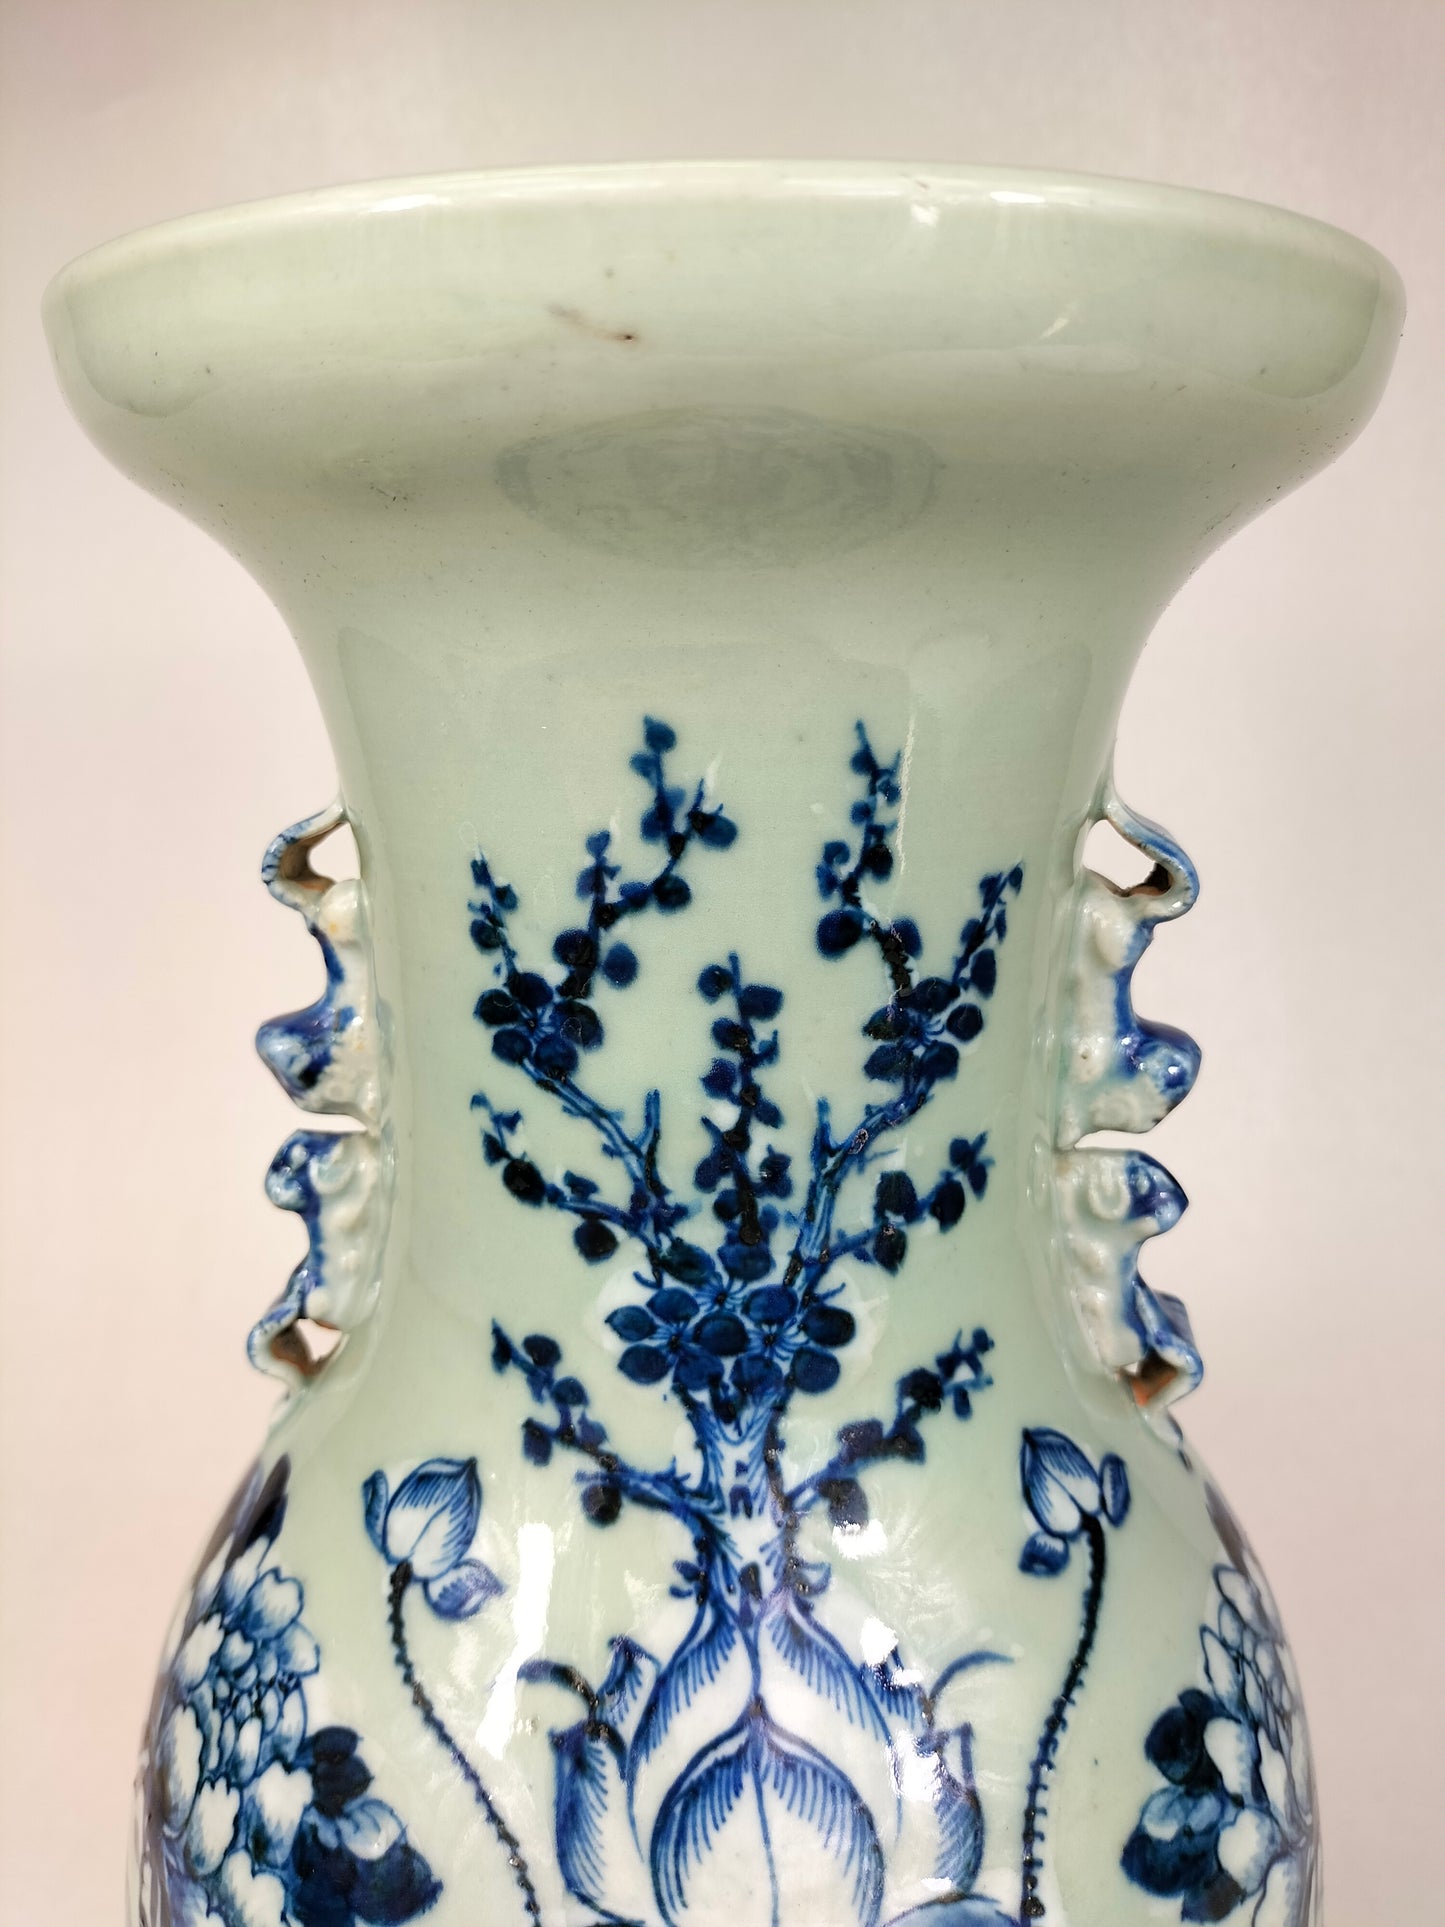 Antique Chinese celadon vase decorated with lotuses // Qing Dynastie - 19th century